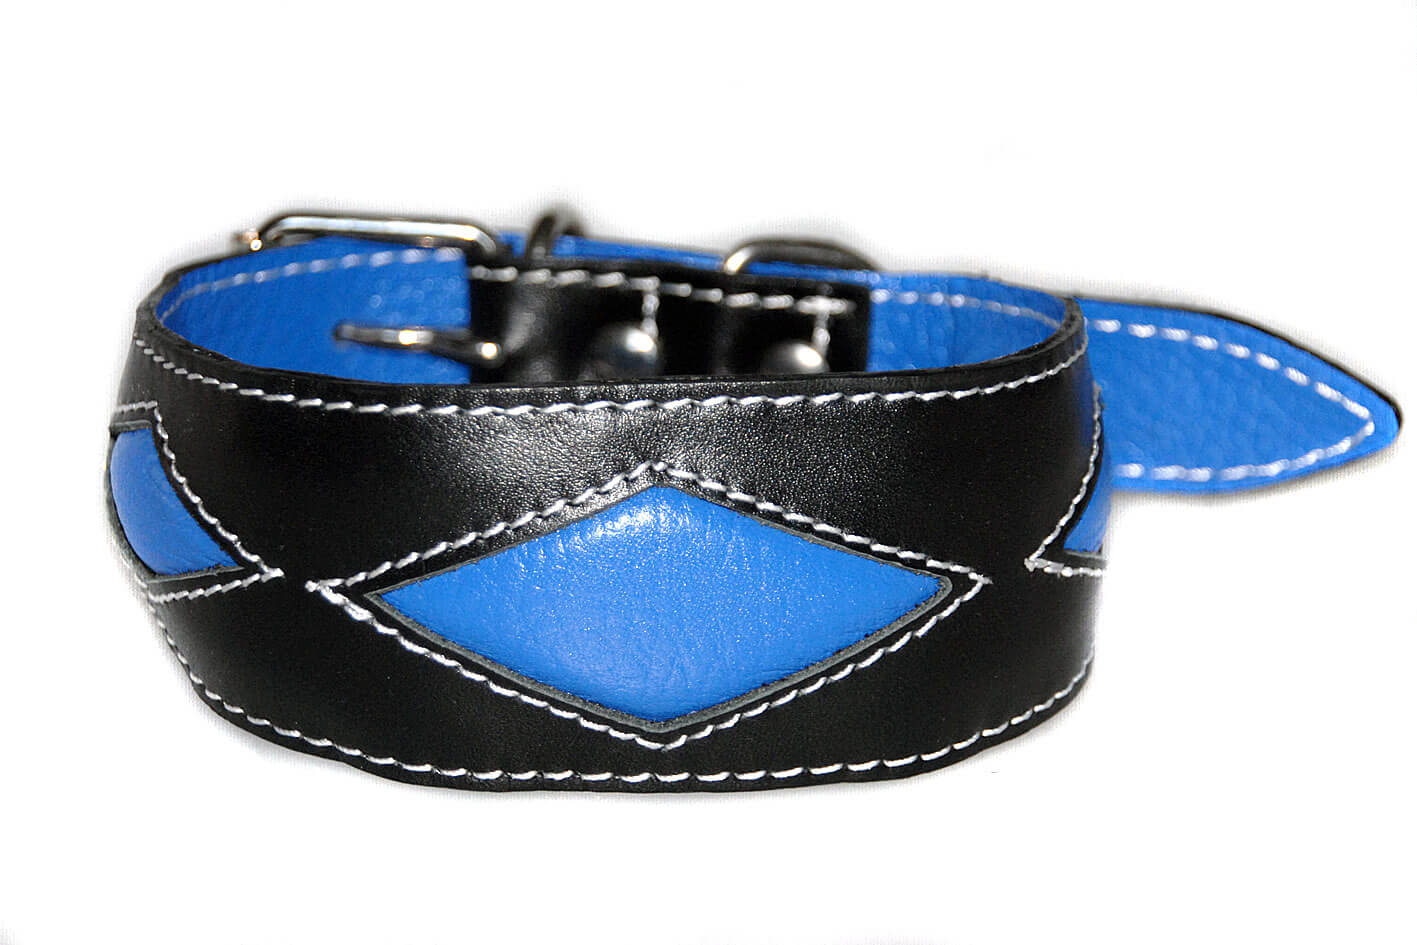 Blue rhombi hound collar is a popular choice for male sighthound